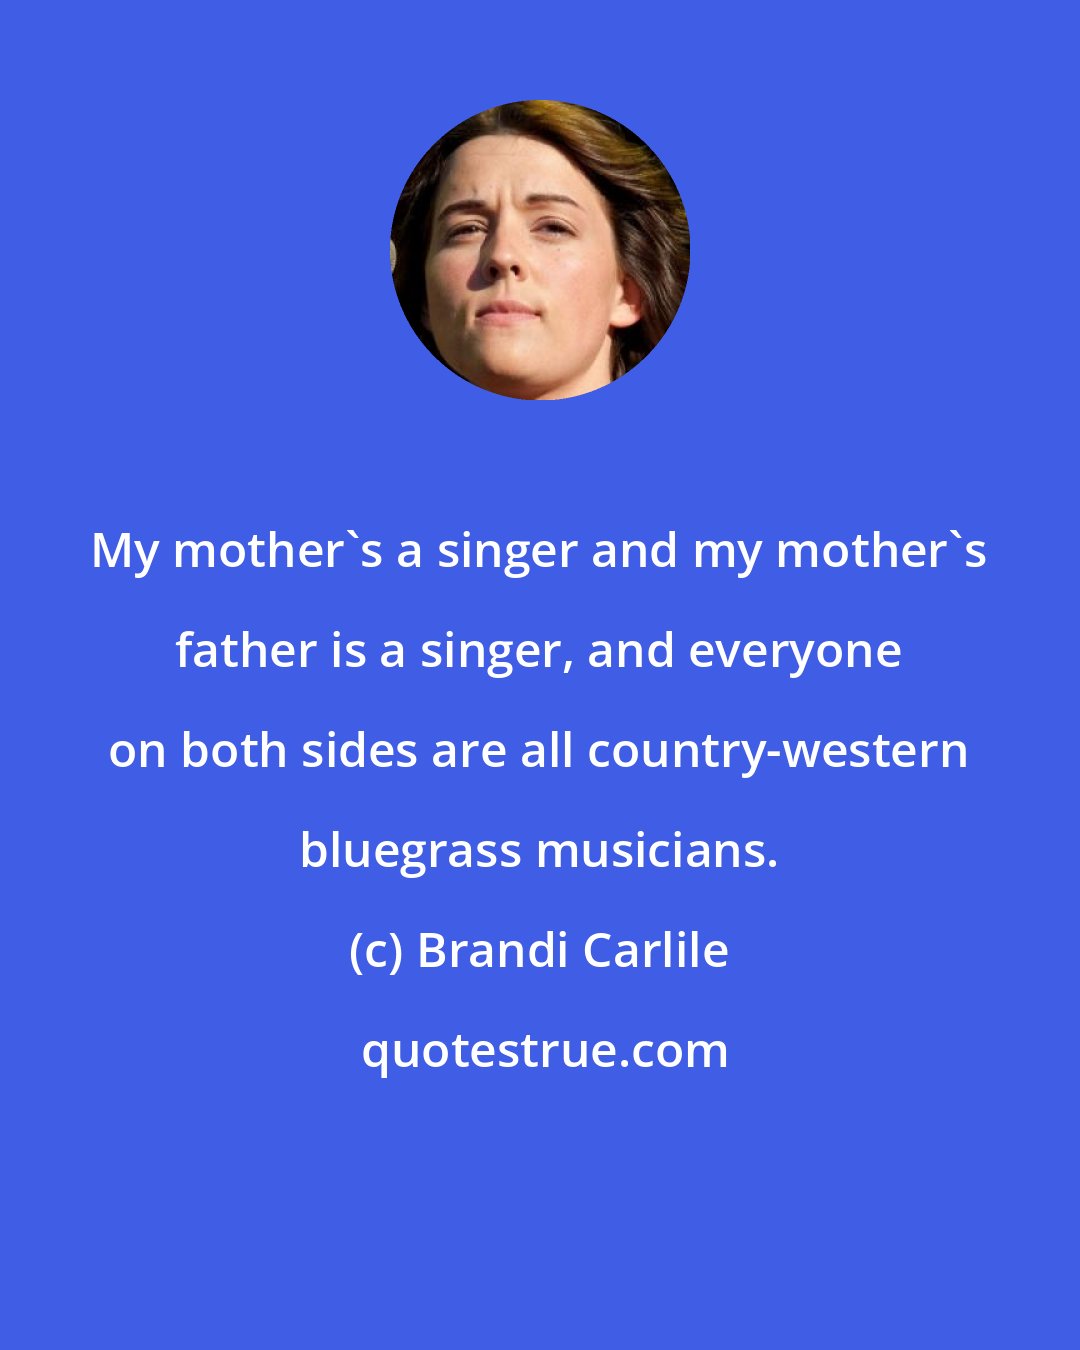 Brandi Carlile: My mother's a singer and my mother's father is a singer, and everyone on both sides are all country-western bluegrass musicians.